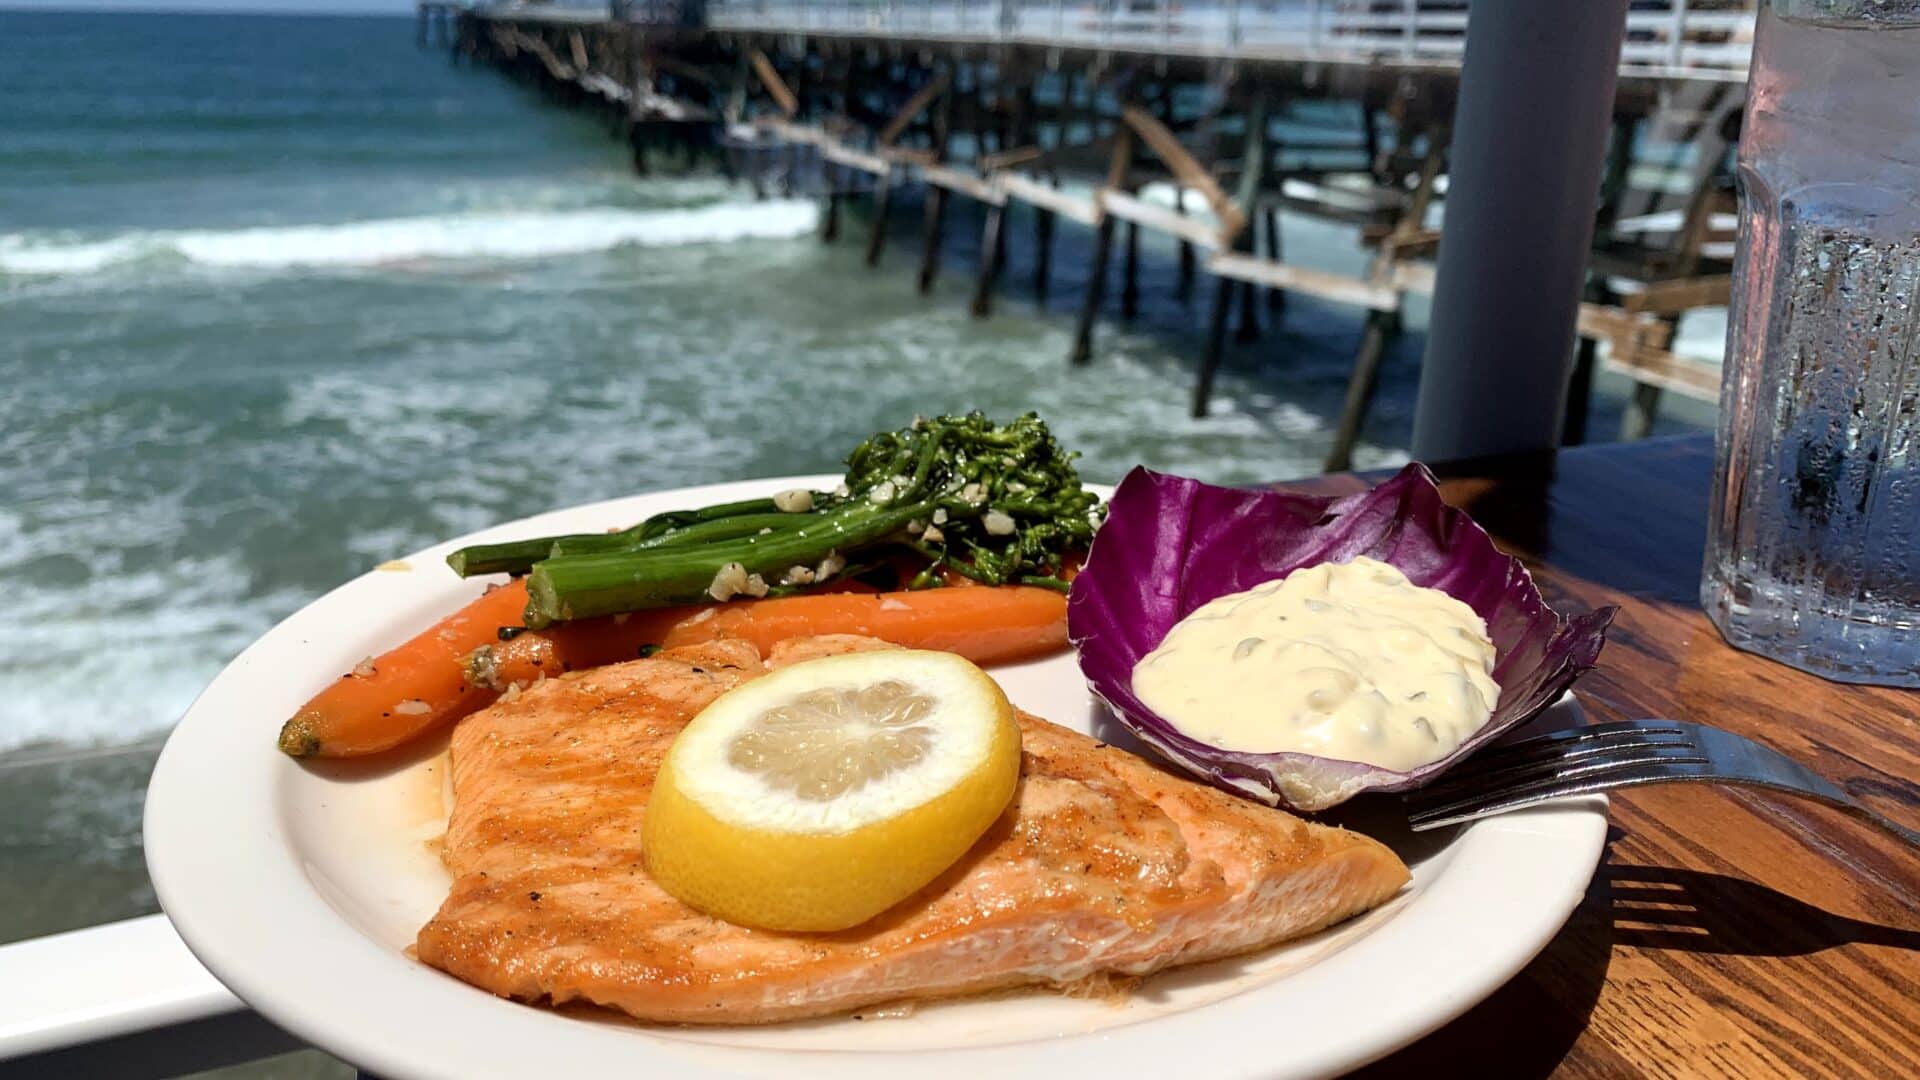 Fish plate with ocean and pier in background